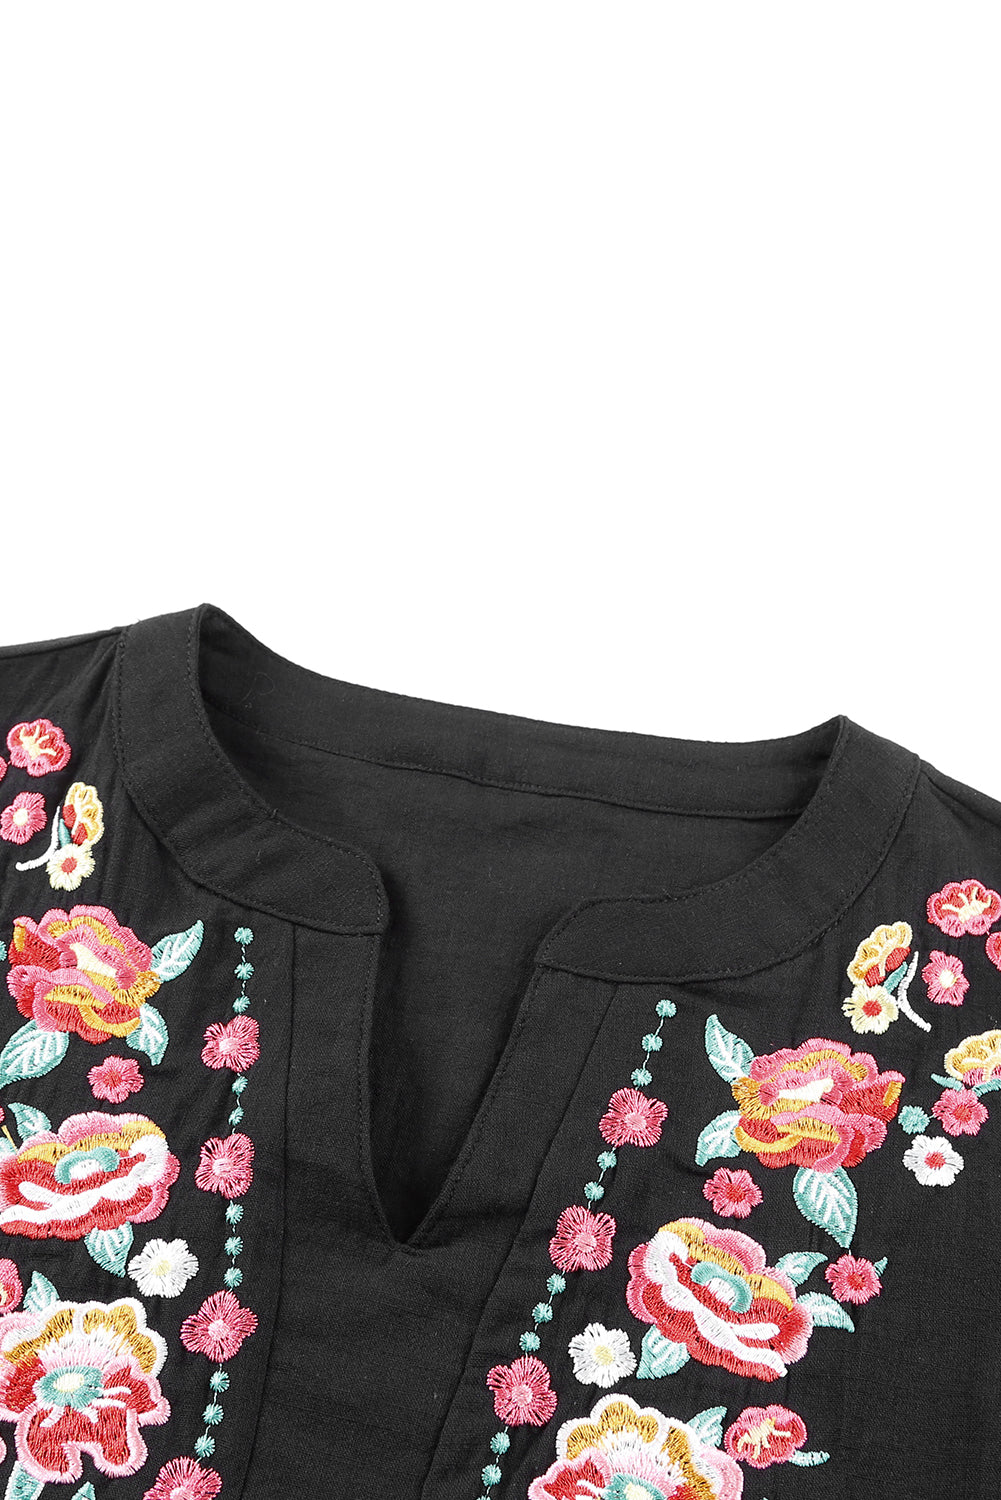 Black Floral Embroidered Ruffled Puff Sleeve Blouse